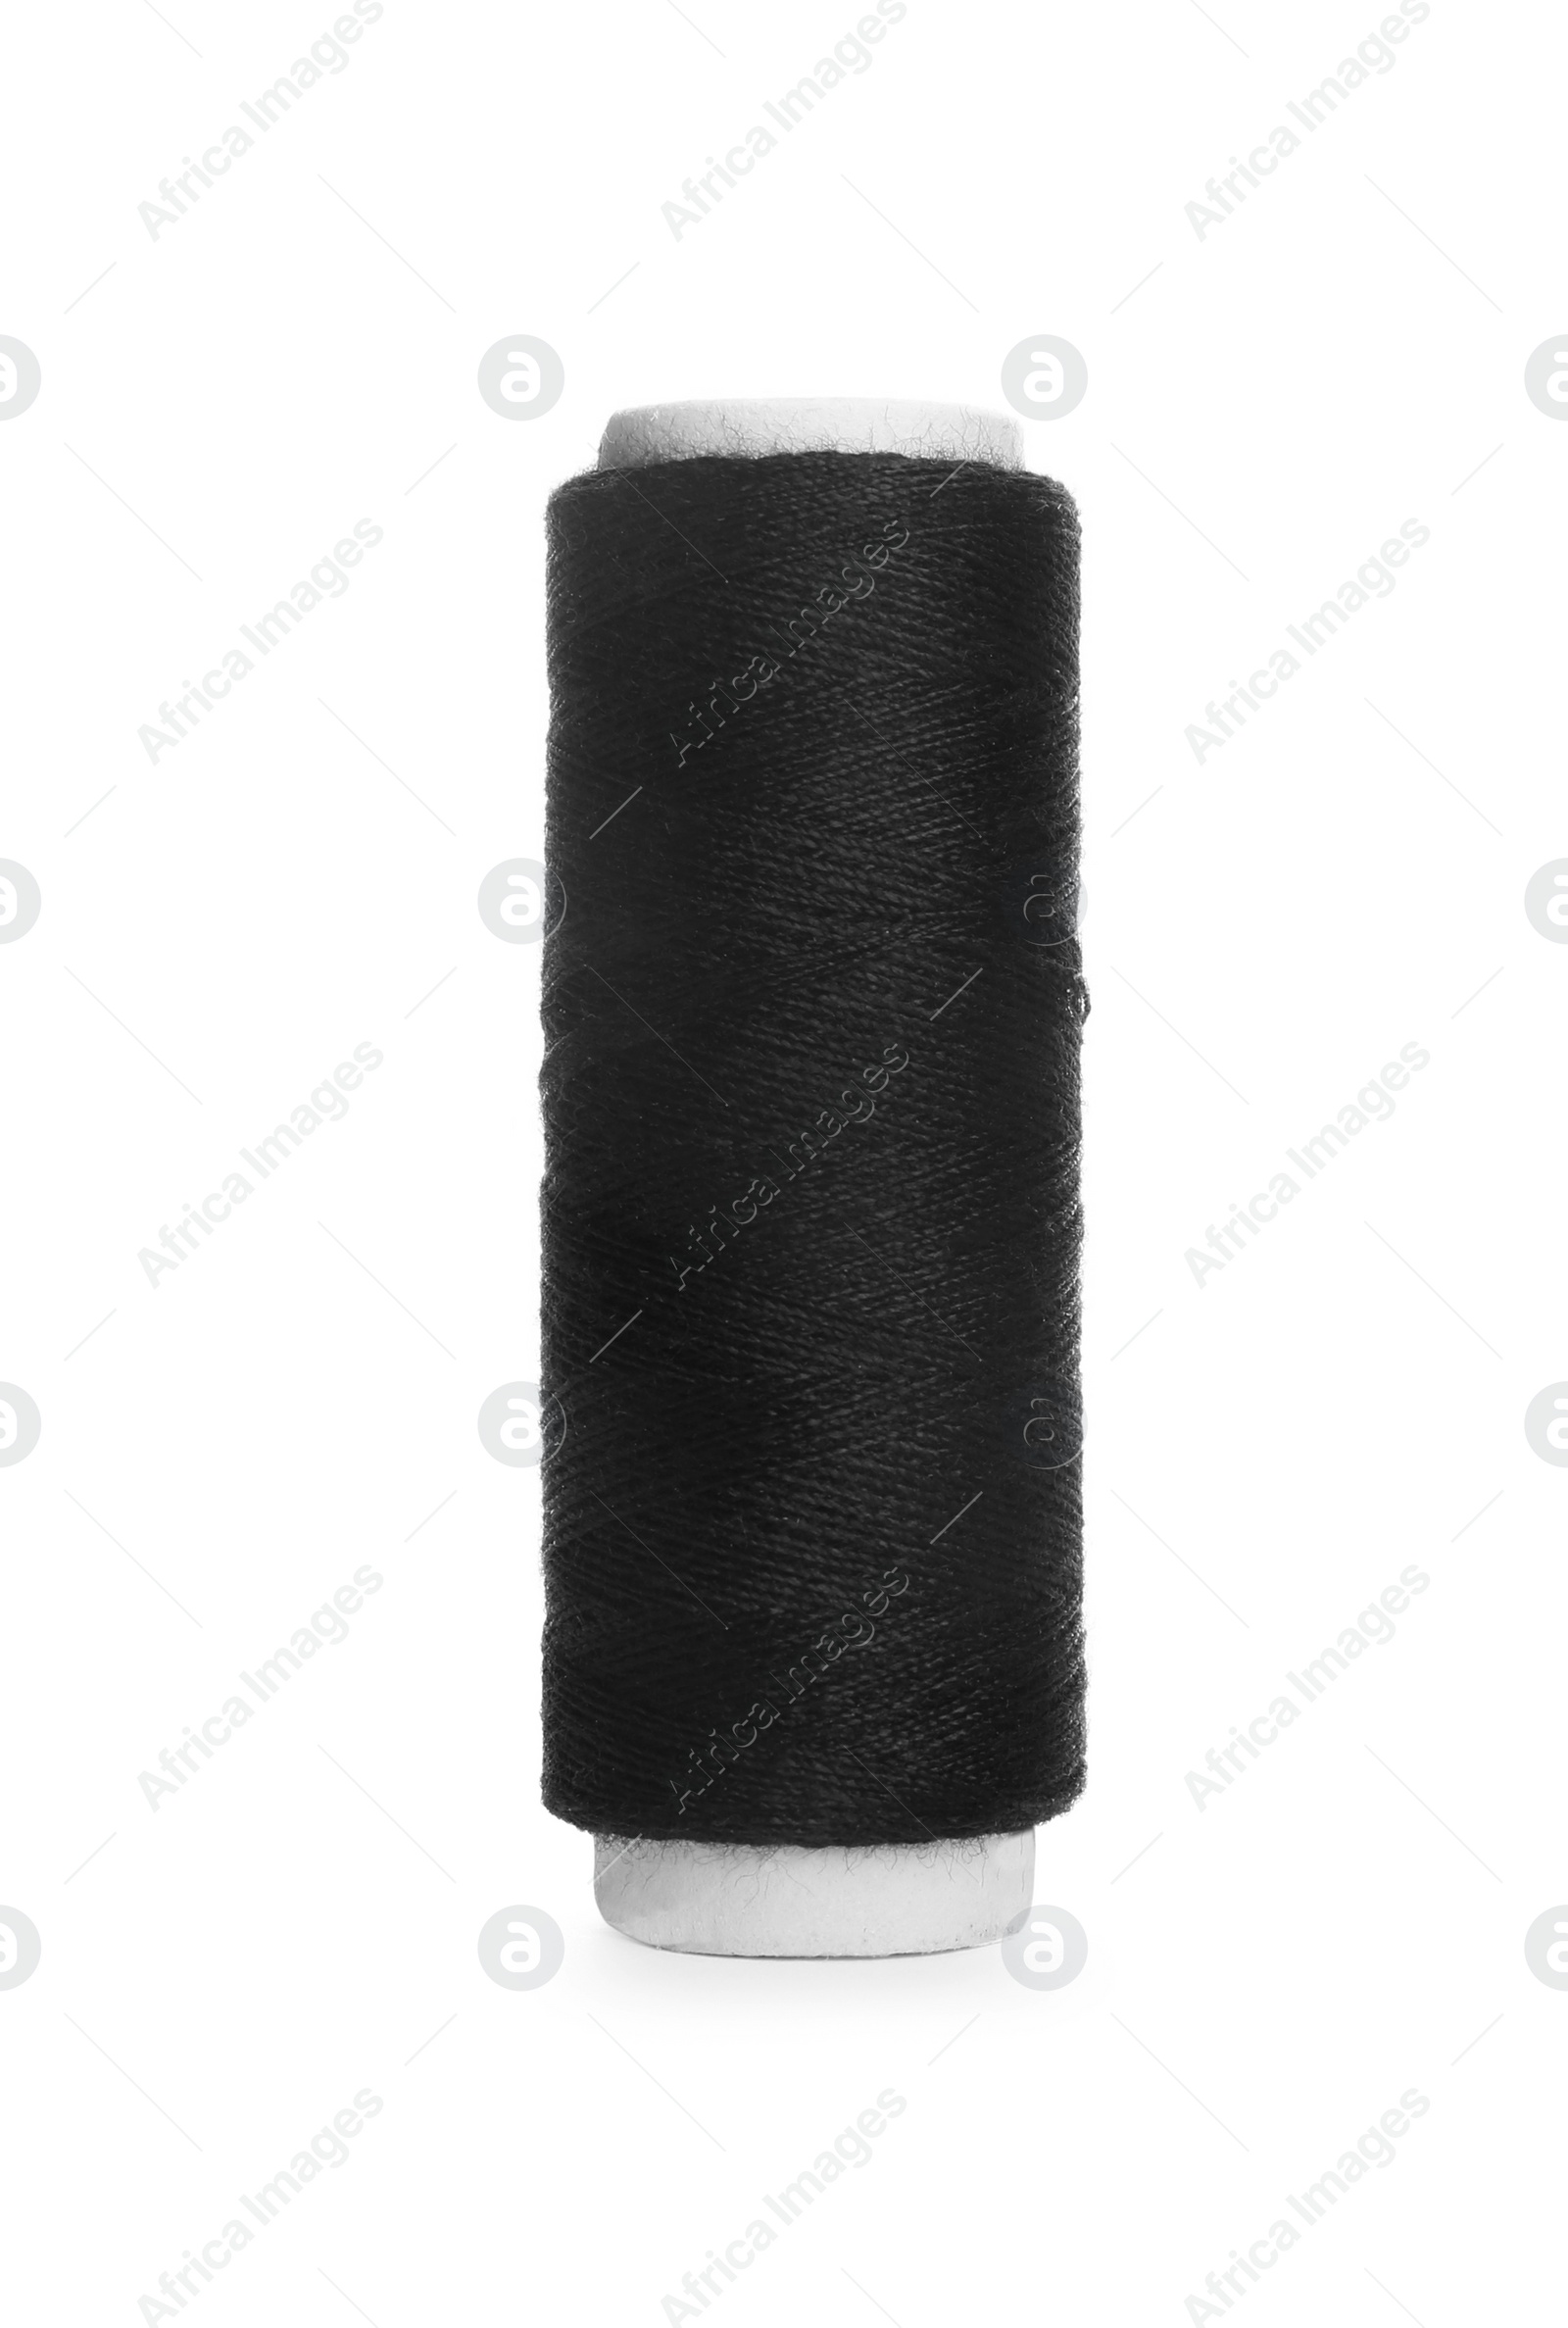 Photo of Spool of black sewing thread isolated on white